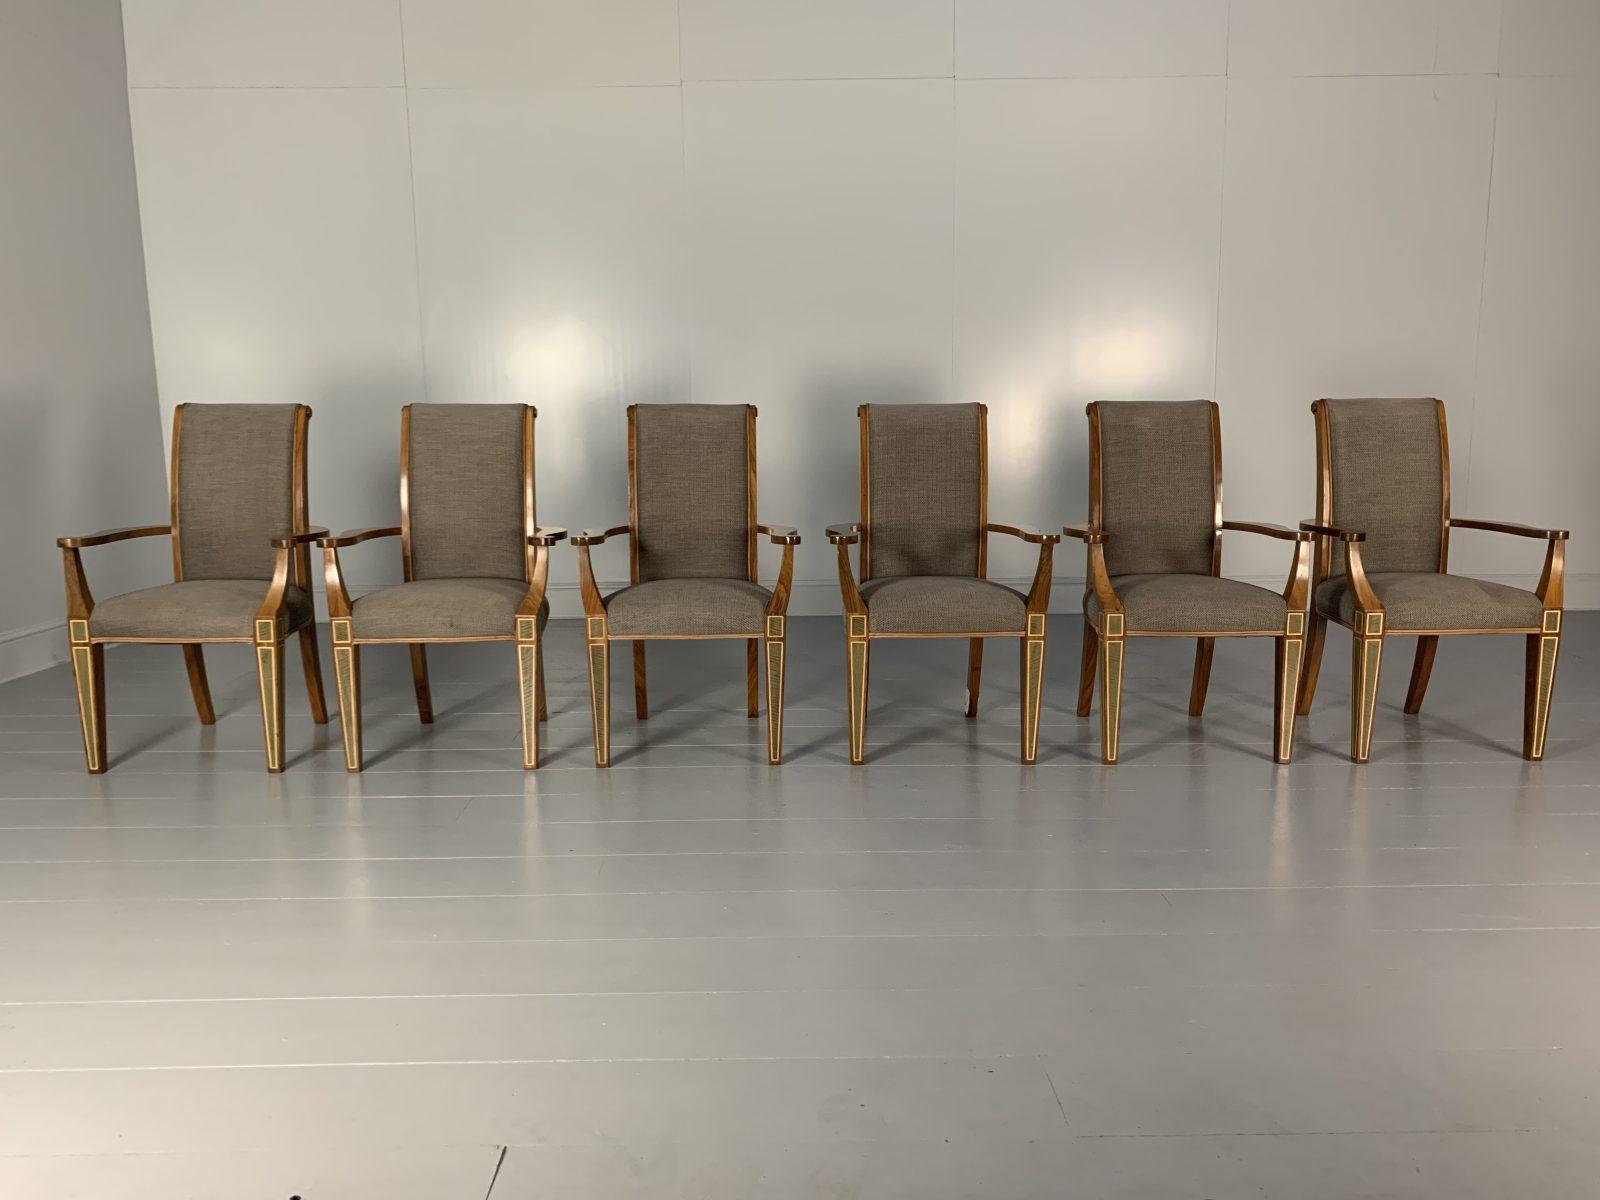 6 Linley “Carver” Dining Chairs, in Woven Fabric & Leather In Good Condition For Sale In Barrowford, GB